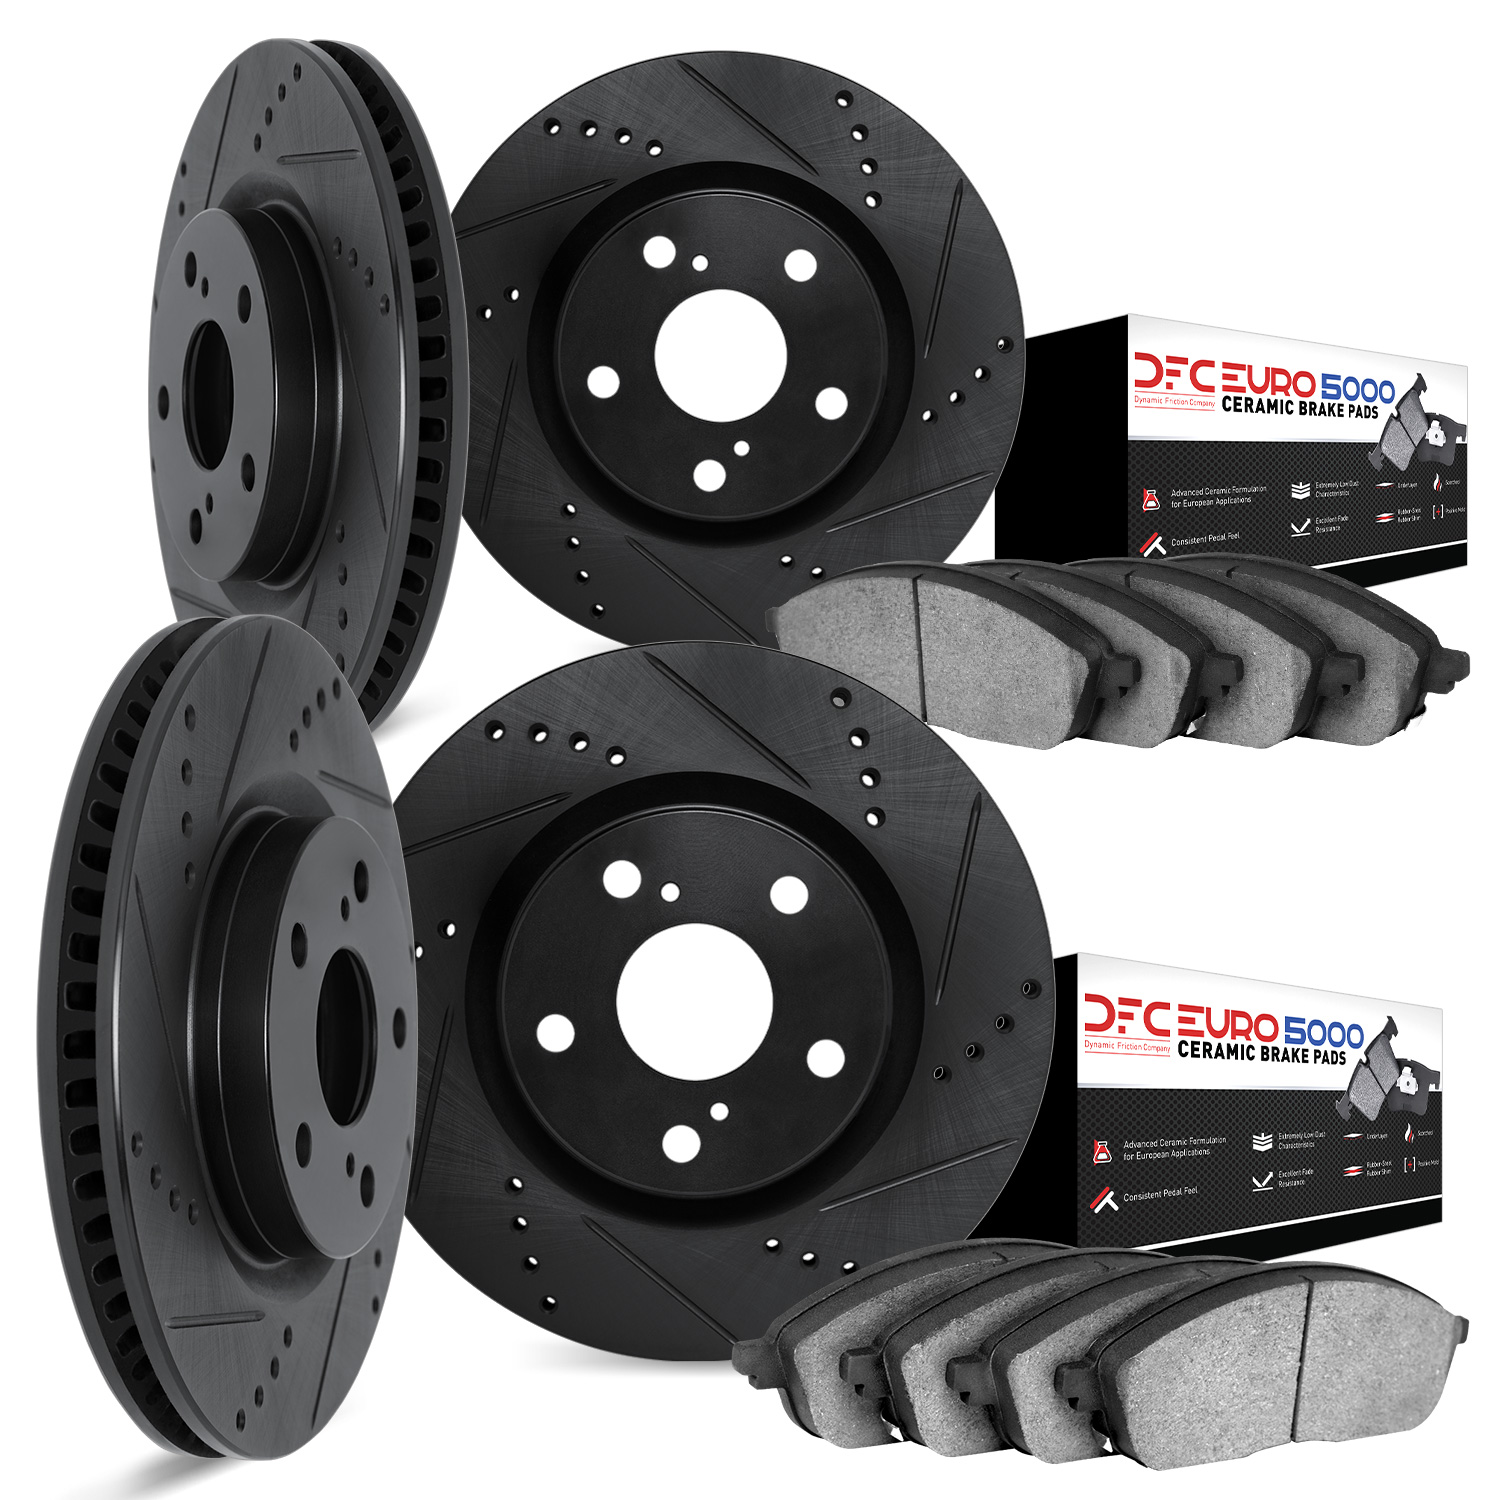 8604-11003 Drilled/Slotted Brake Rotors w/5000 Euro Ceramic Brake Pads Kit [Black], 2005-2007 Land Rover, Position: Front and Re